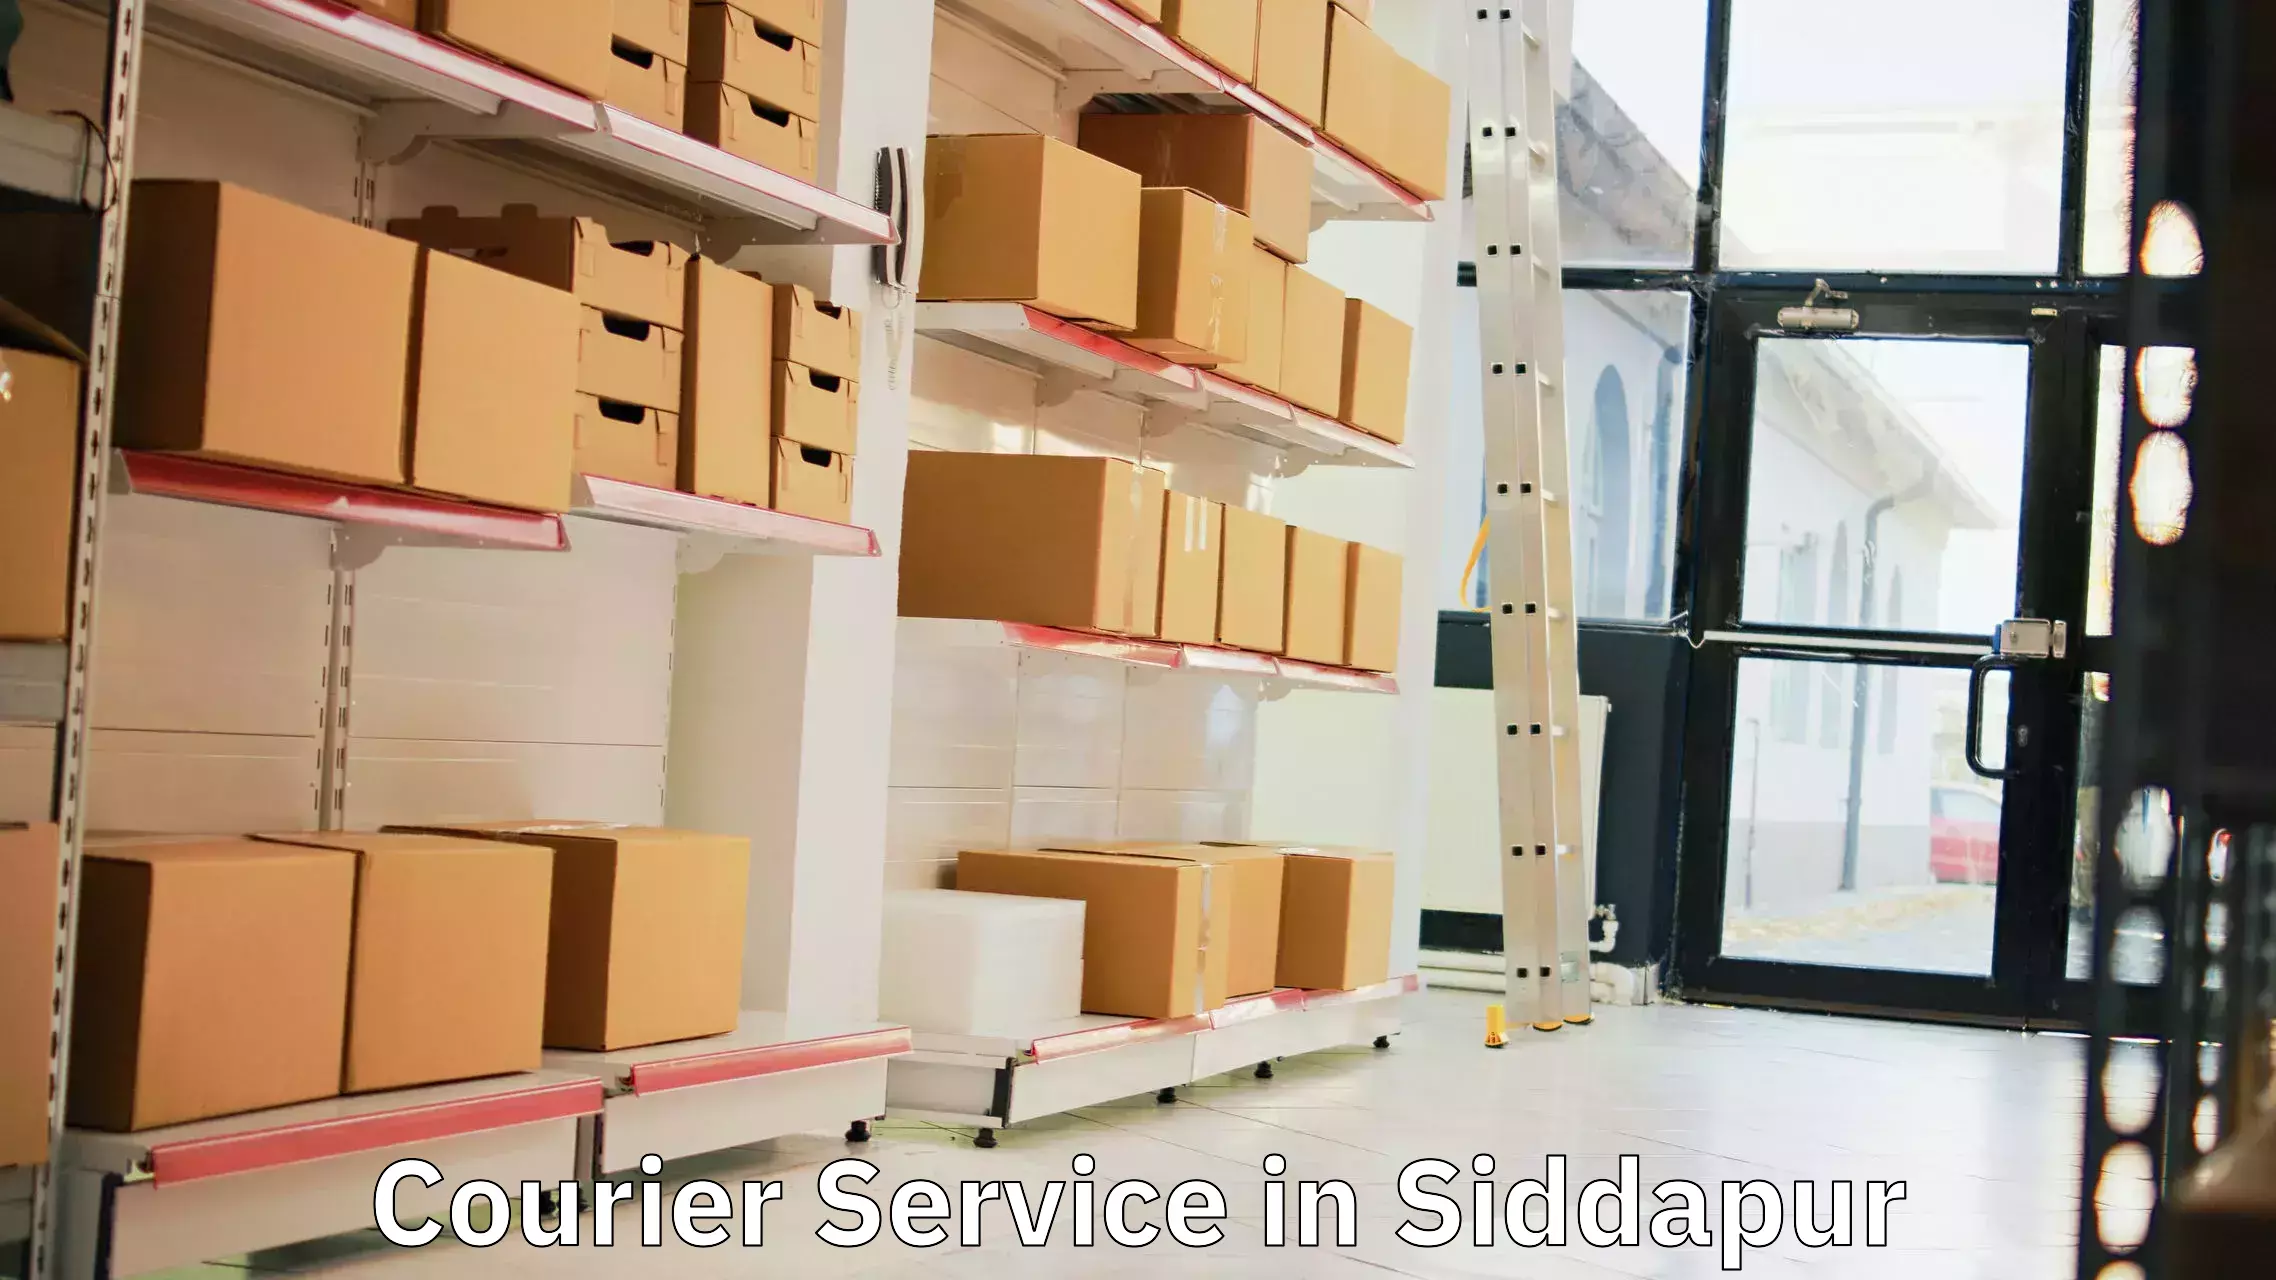 High-priority parcel service in Siddapur